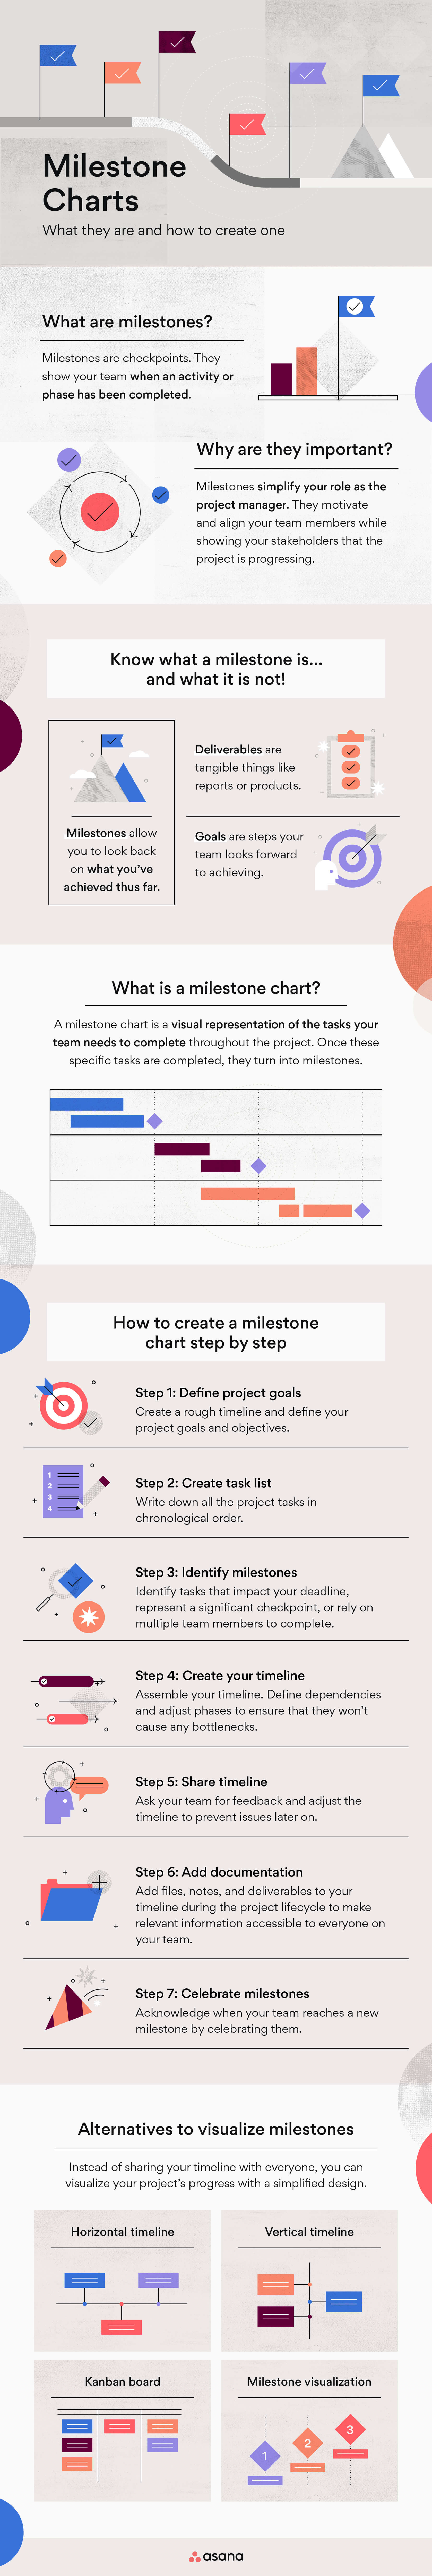 what are milestone charts infographic